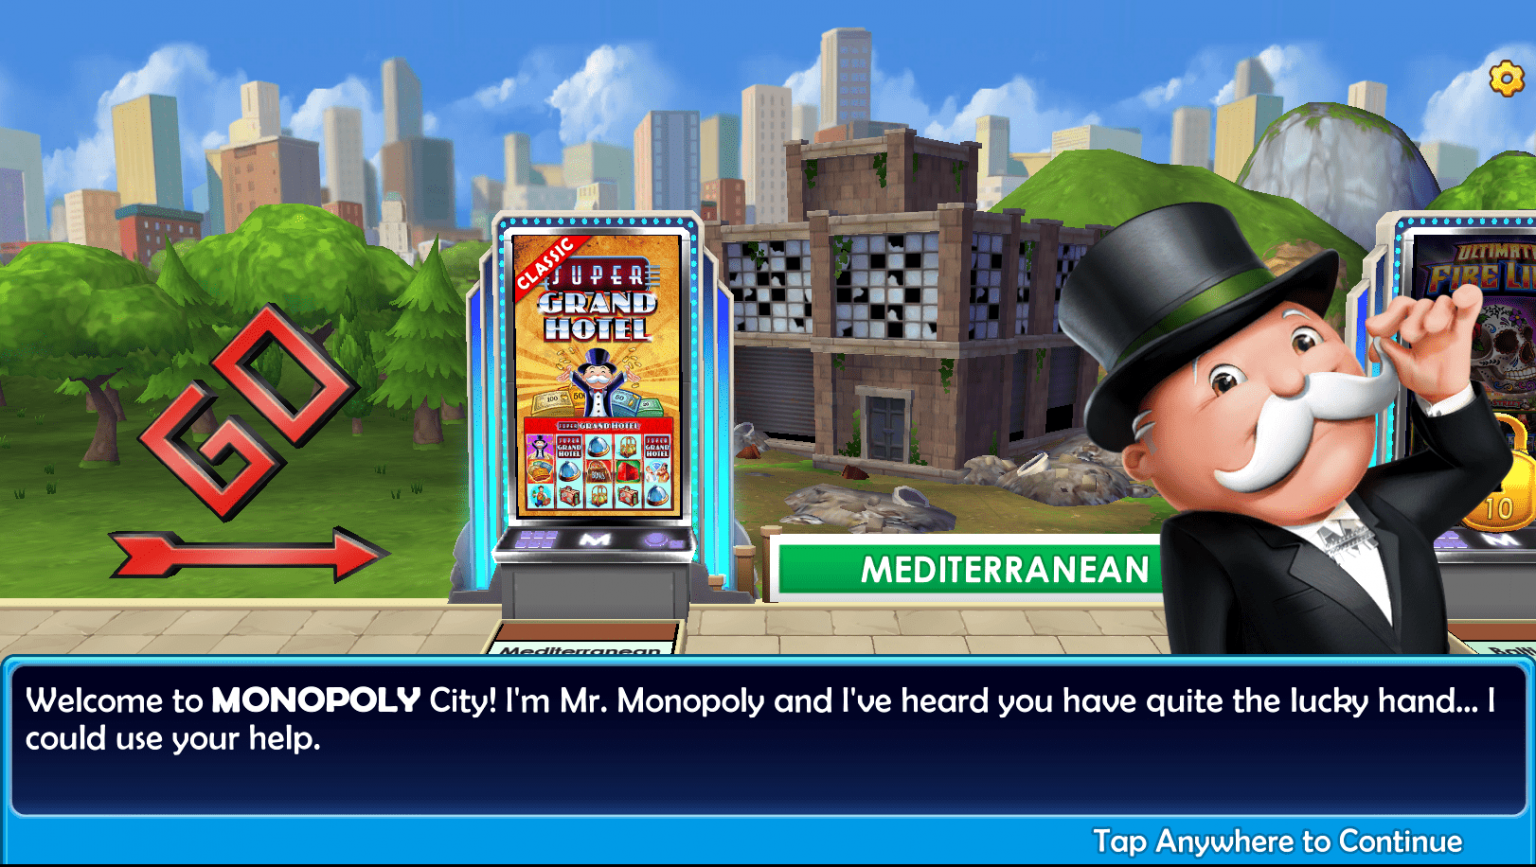 monopoly slot game online